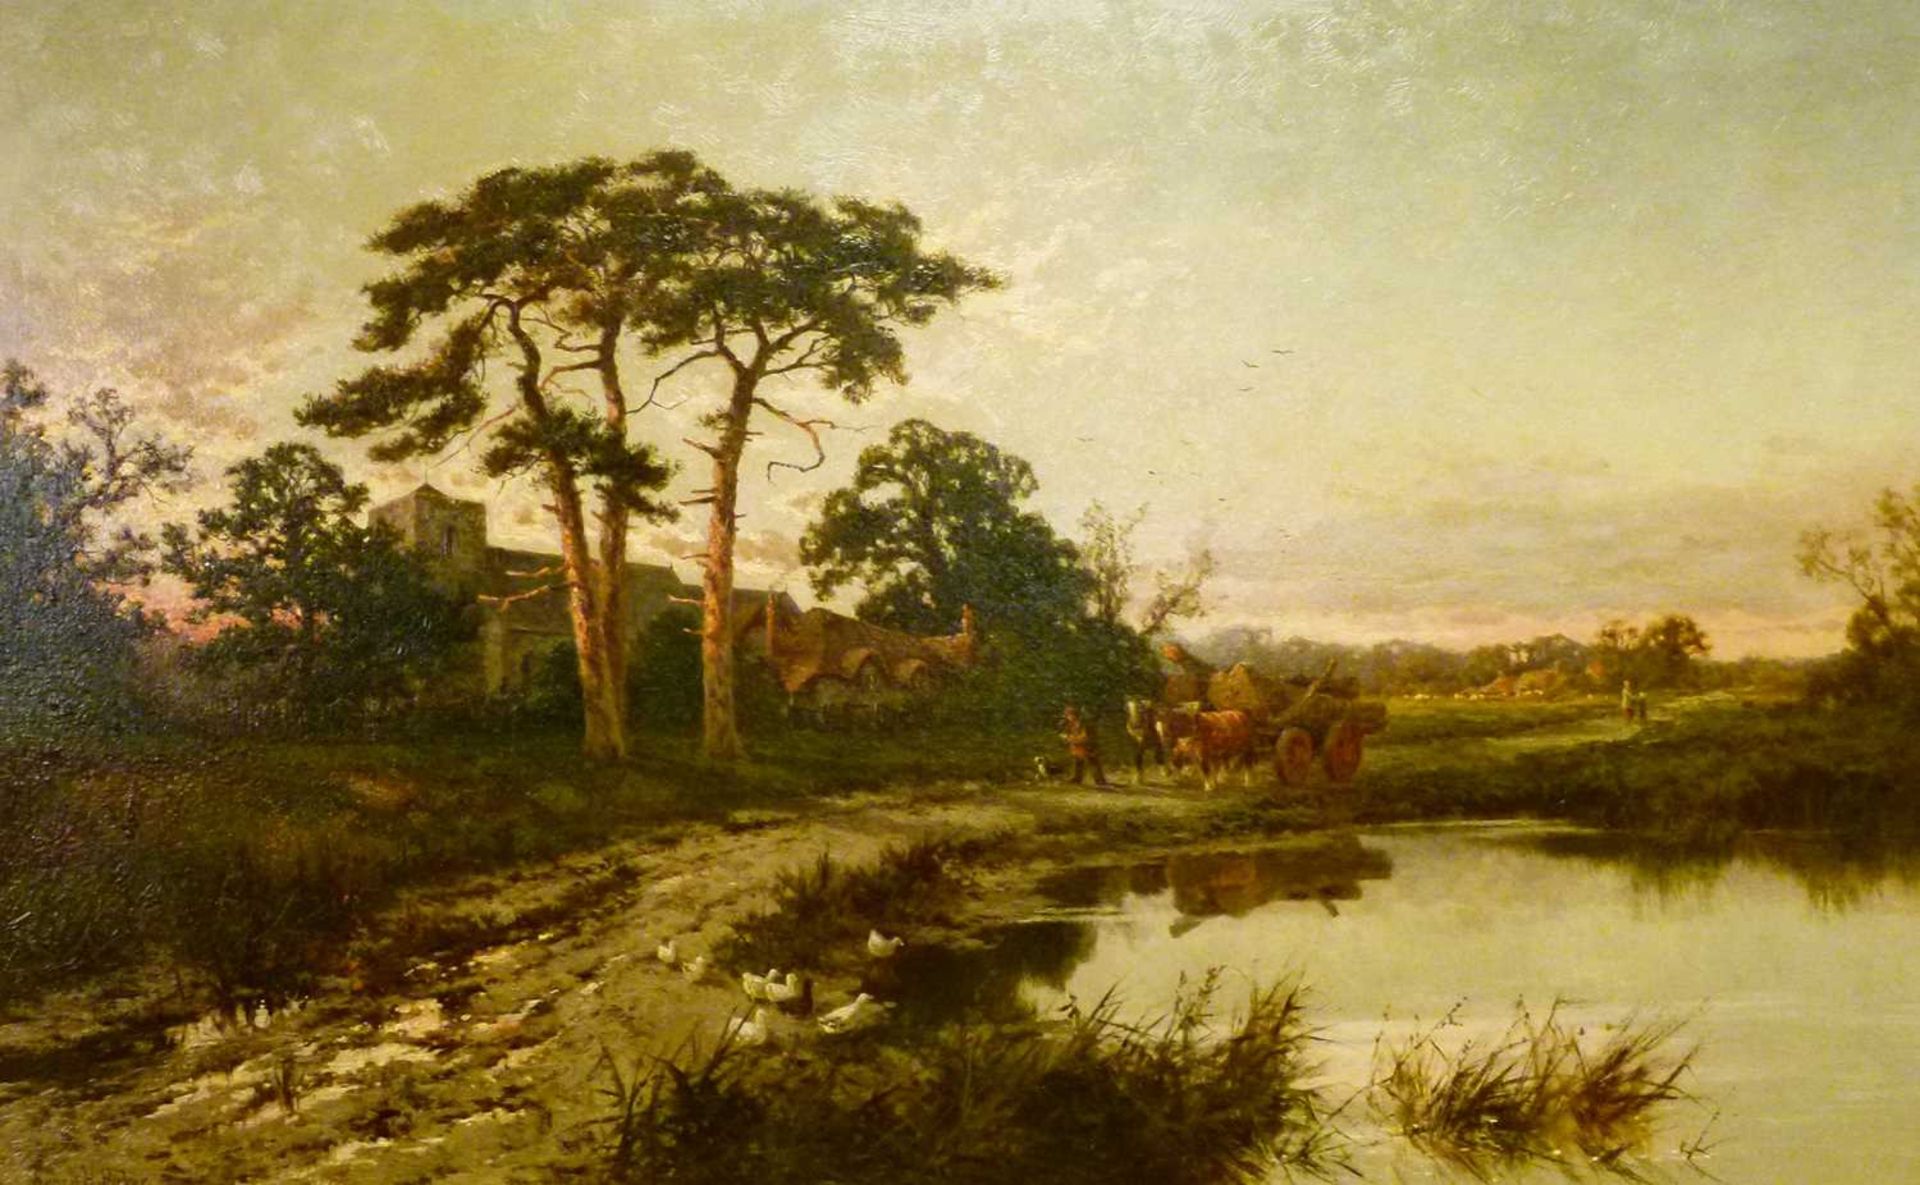 Henry Hillier Parker (1858-1930) - Oil on canvas - 'Near Godalming, Surrey' - Image 12 of 32